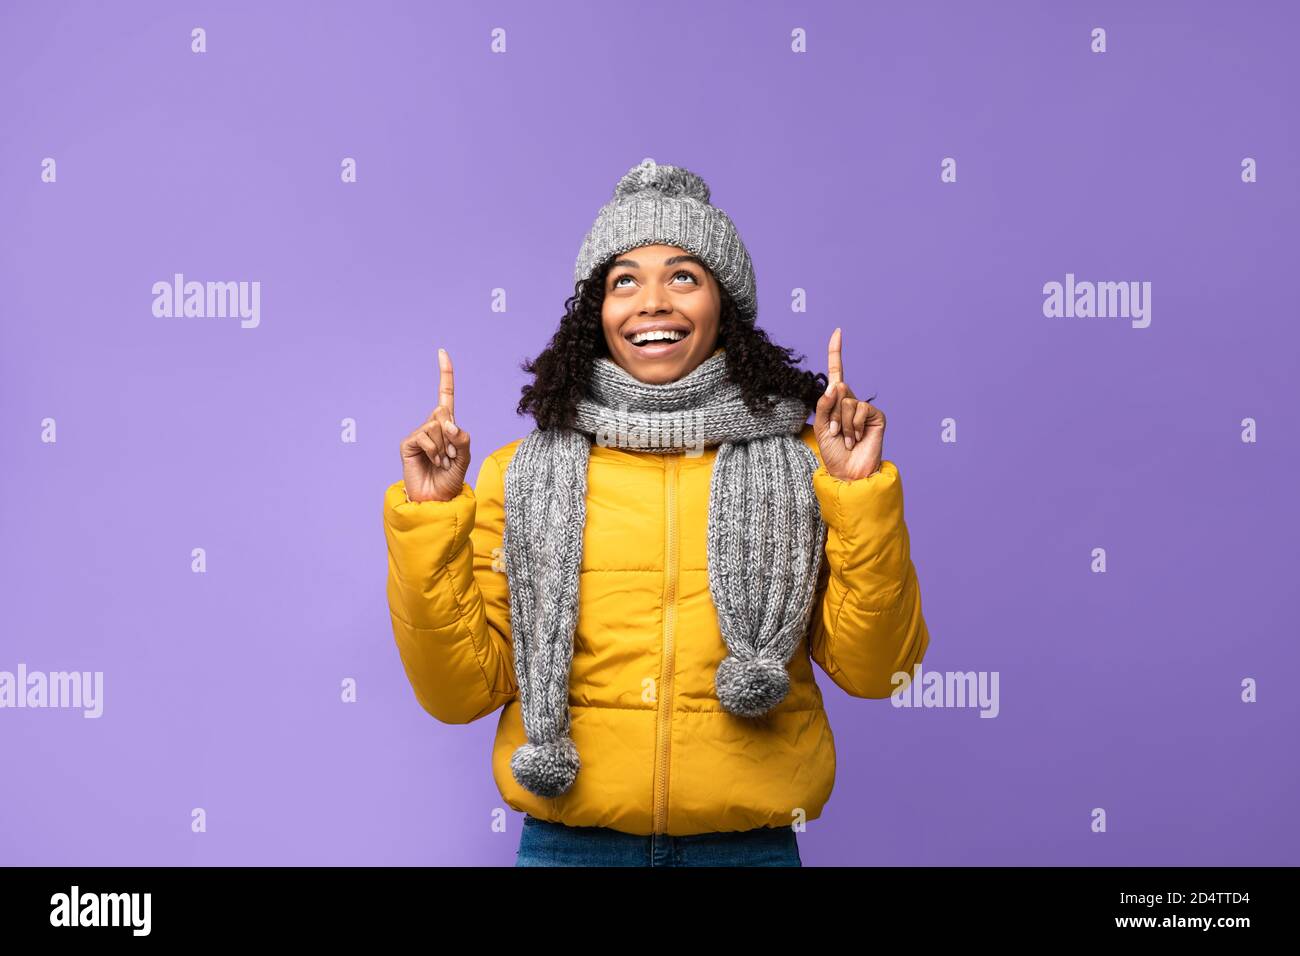 African Lady In Winter Jacket Pointing Fingers Upward, Purple Background Stock Photo